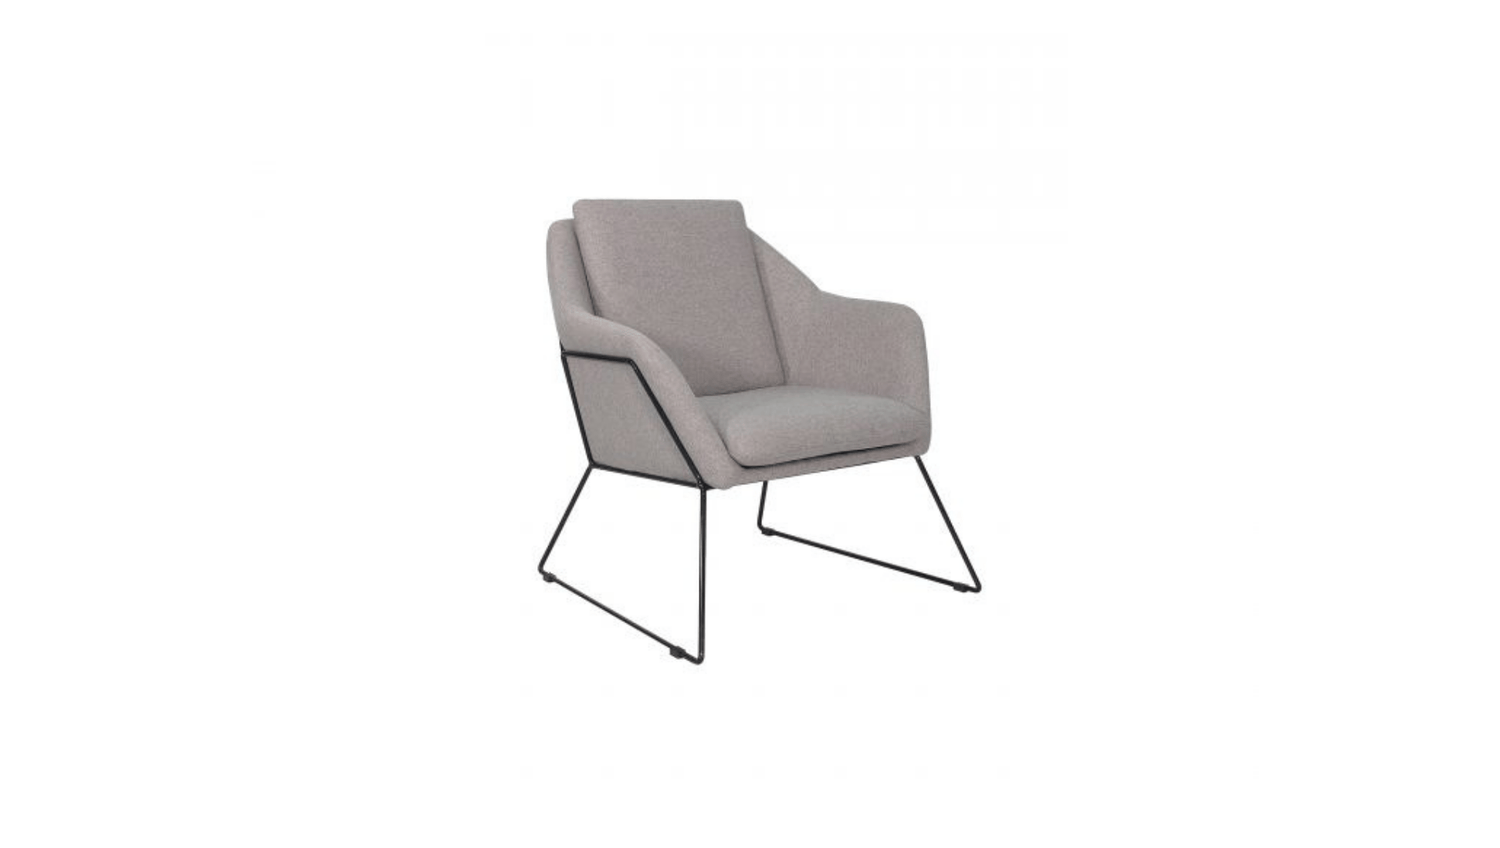 Soft Seating Tetra Chair